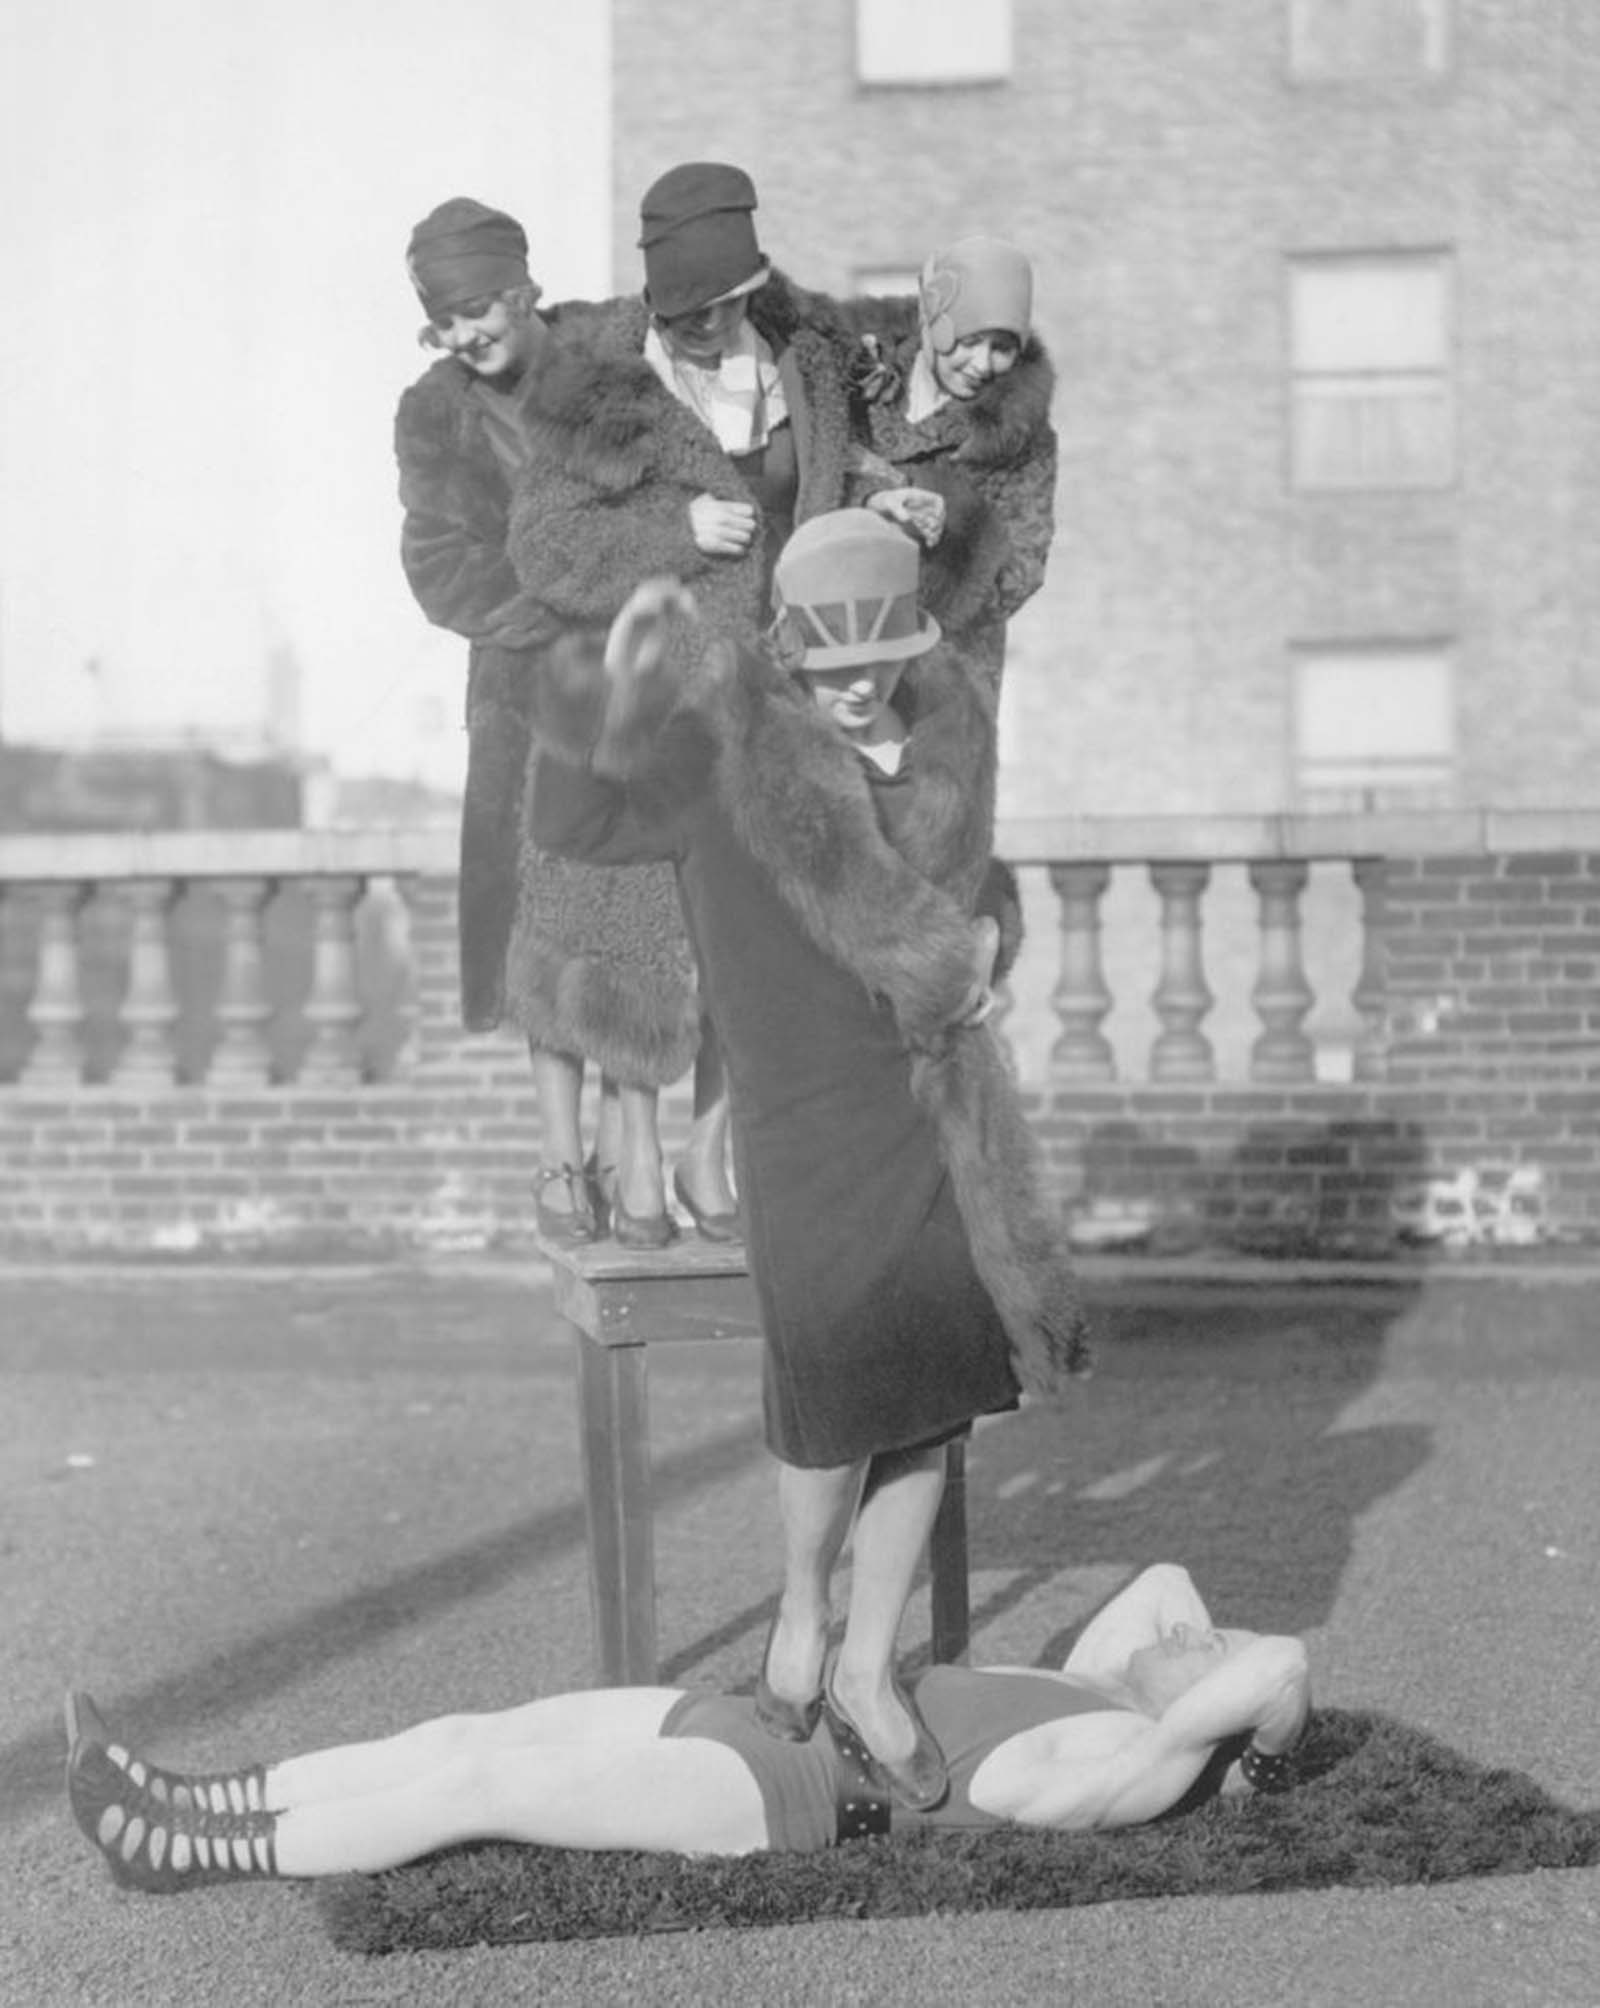 Andre Reverdy demonstrates his core strength by having women jump on his mid-section from a table, 1920s